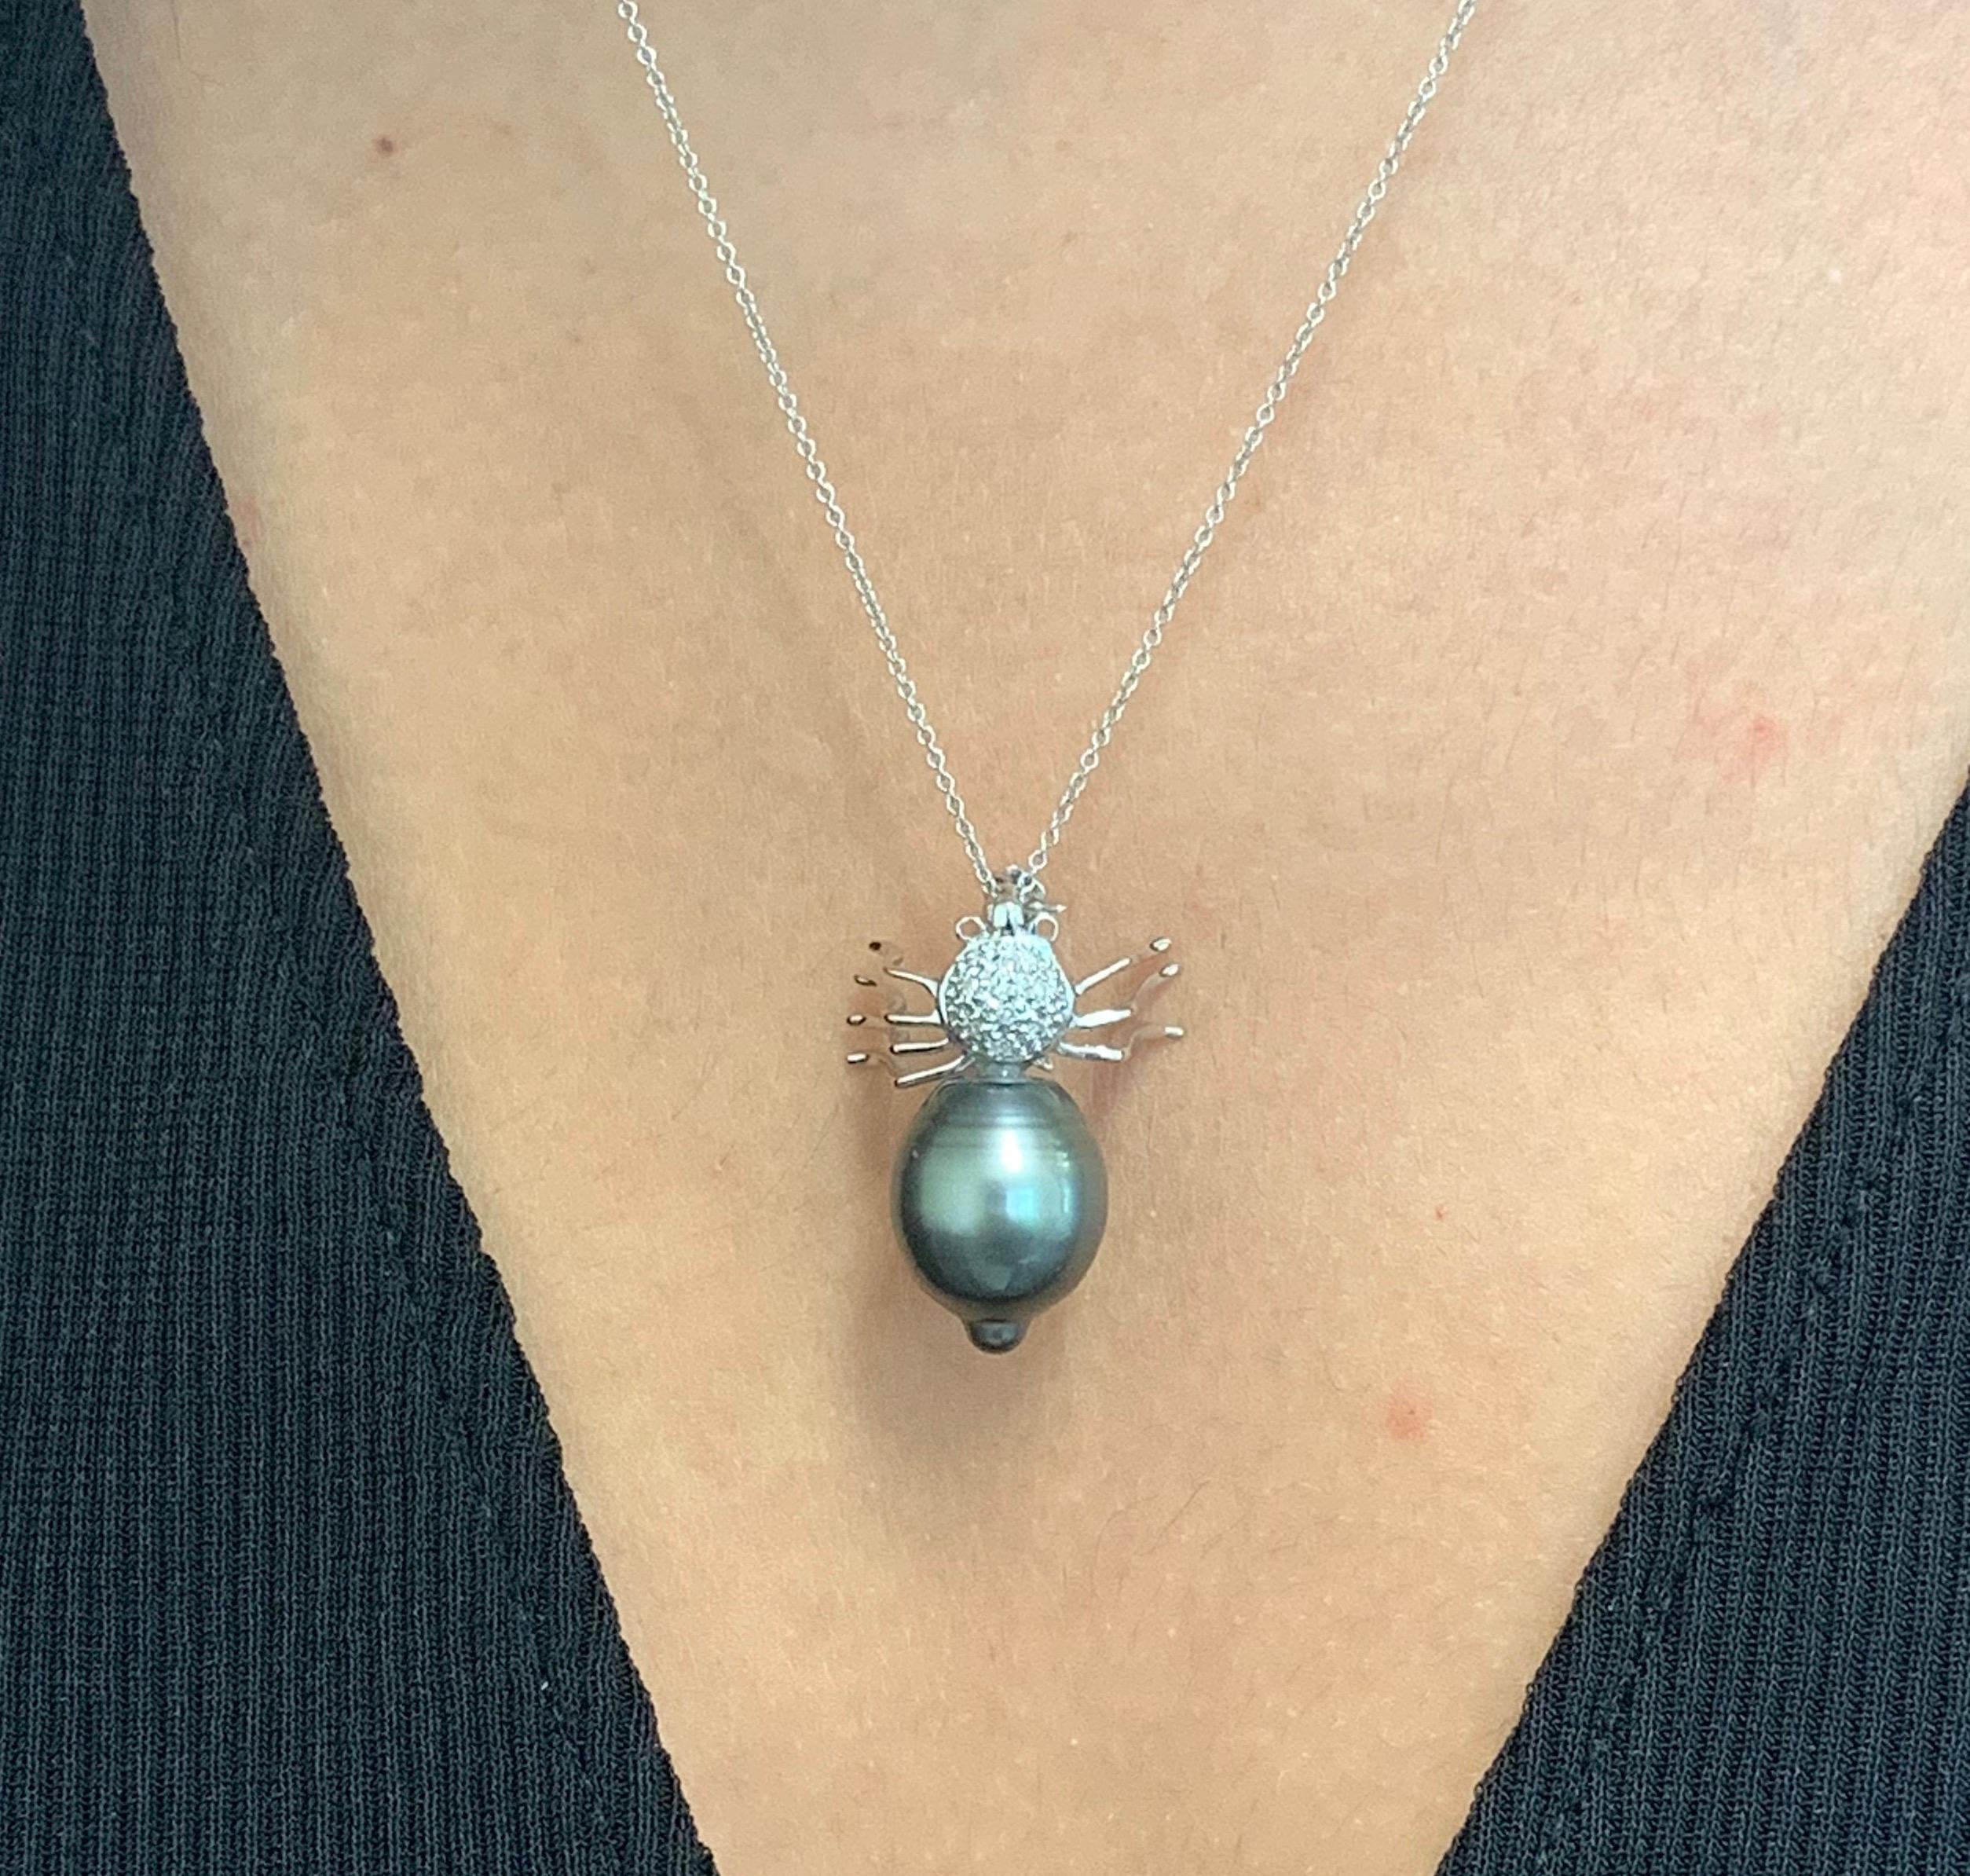 Material: 14K White Gold
Center Stone Details: 1 Round Tahitian South Sea Pearl 
Diamonds: 1 Round Brilliant Diamonds at 0.05 Carats. SI Clarity/ H-I Color

Fine one-of-a-kind craftsmanship meets incredible quality in this breathtaking piece of